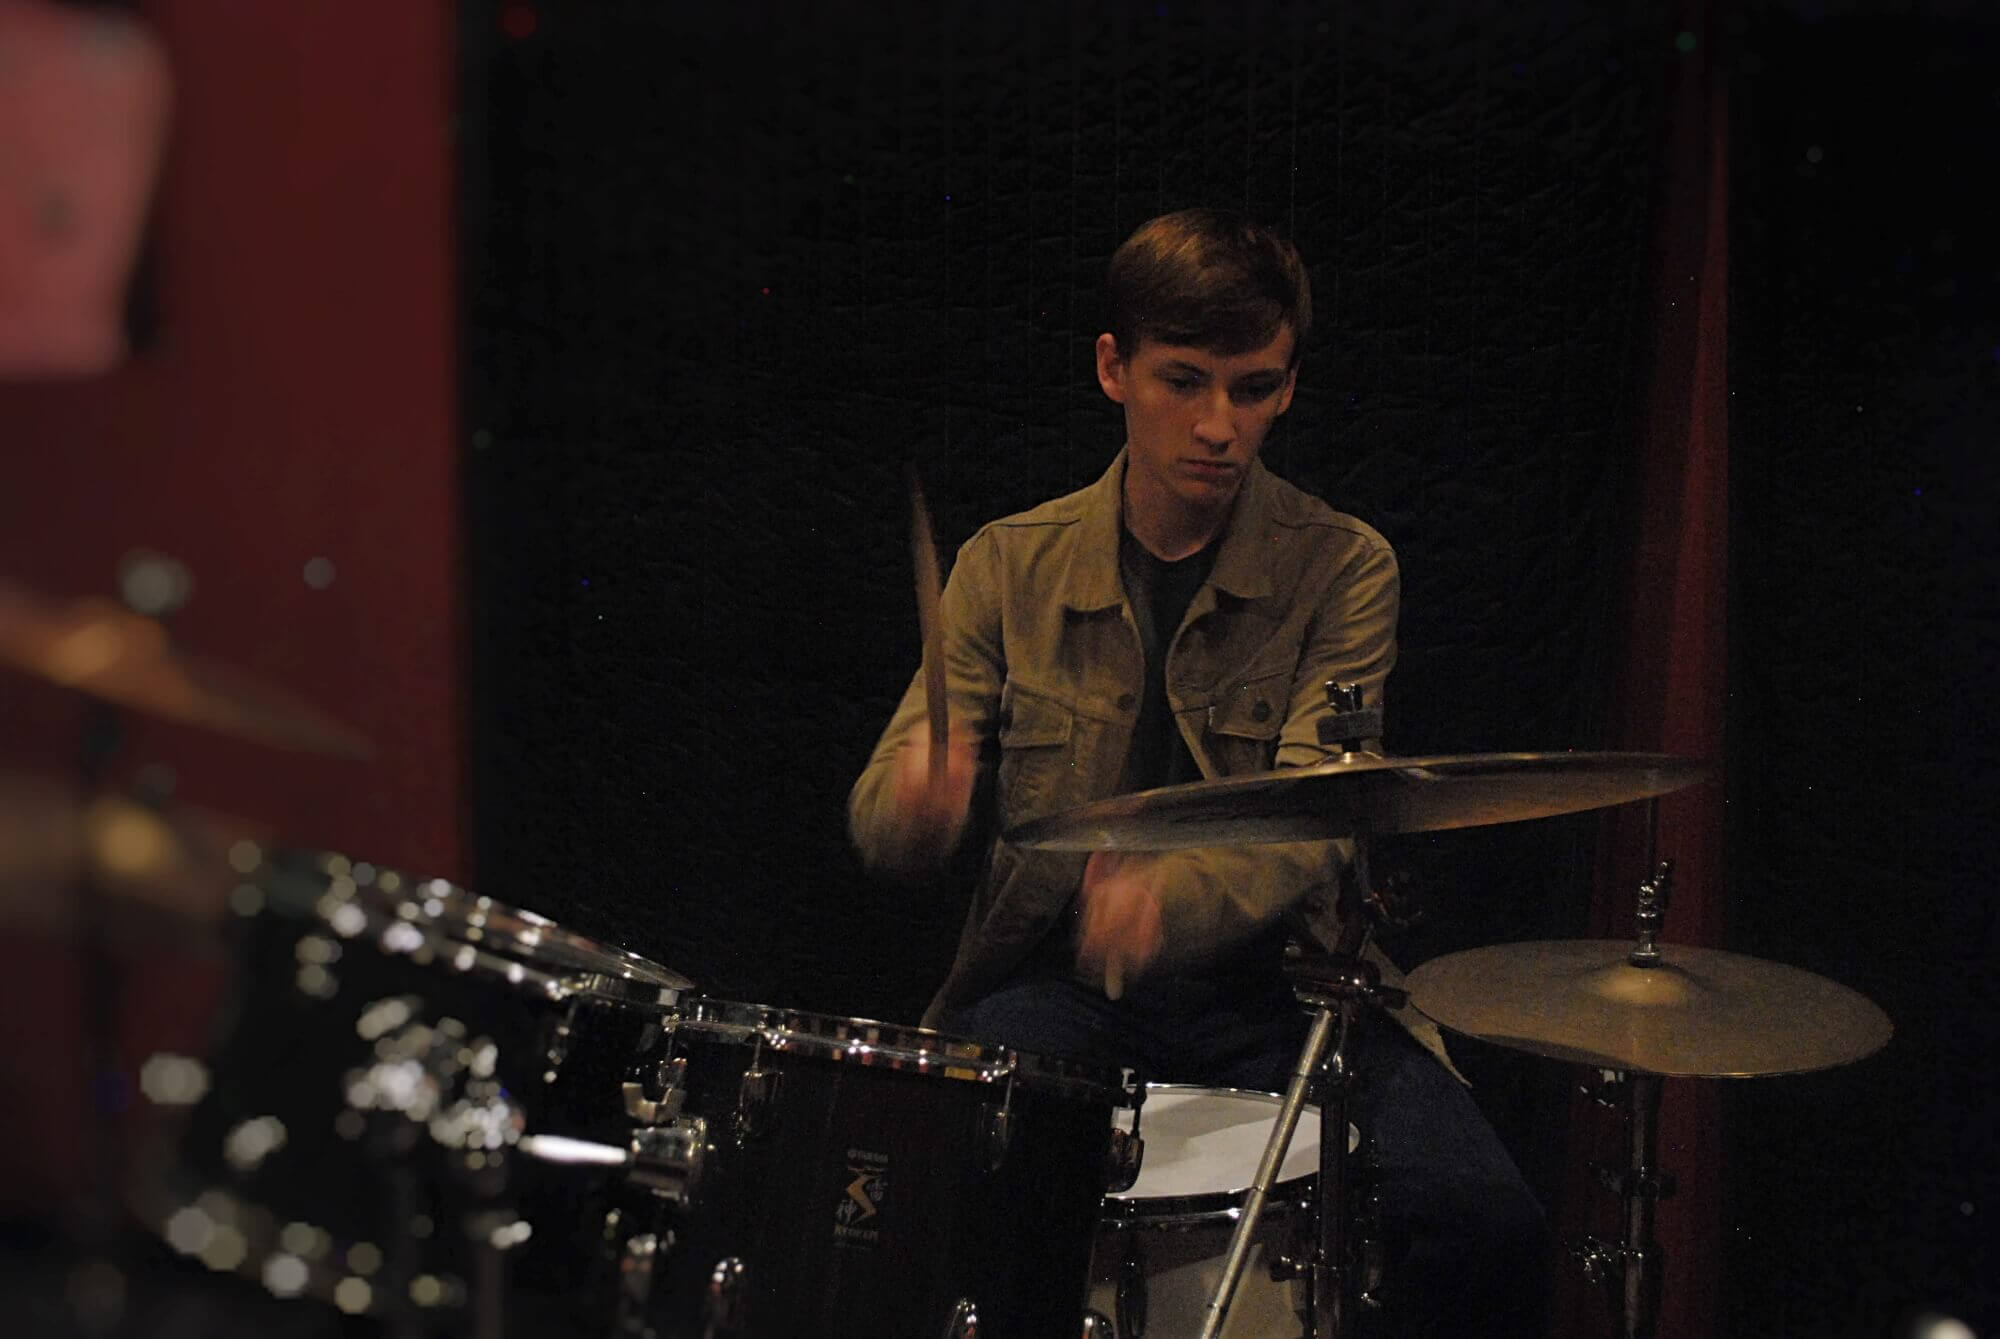 A Katy House Band student works on his drum fills during rehearsal.